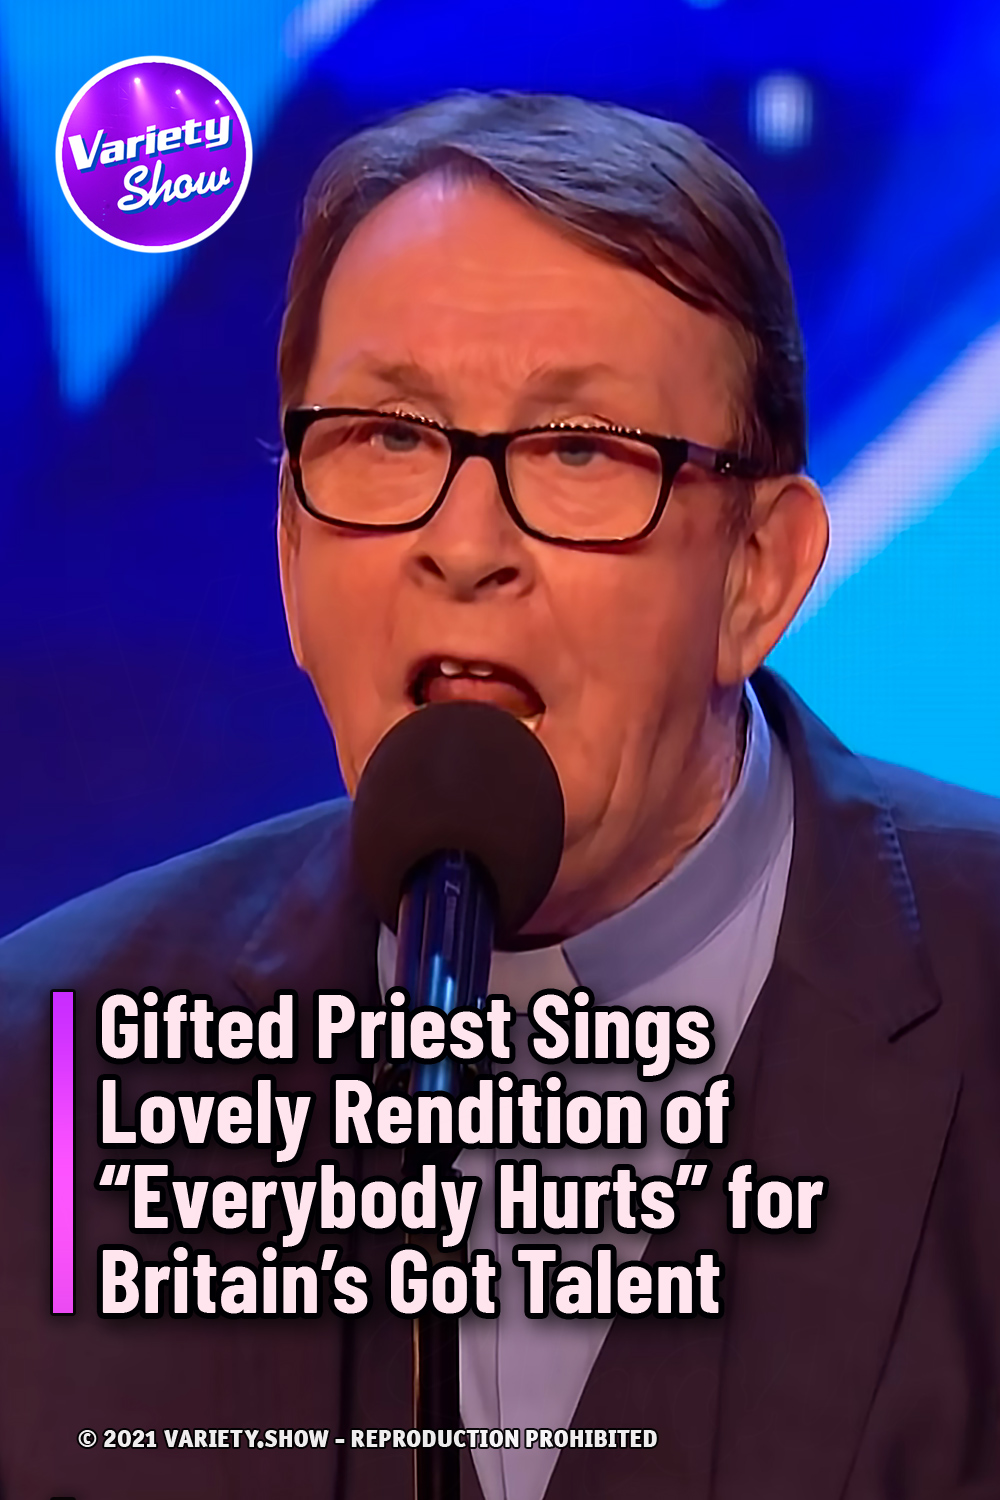 Gifted Priest Sings Lovely Rendition of “Everybody Hurts” for Britain’s Got Talent